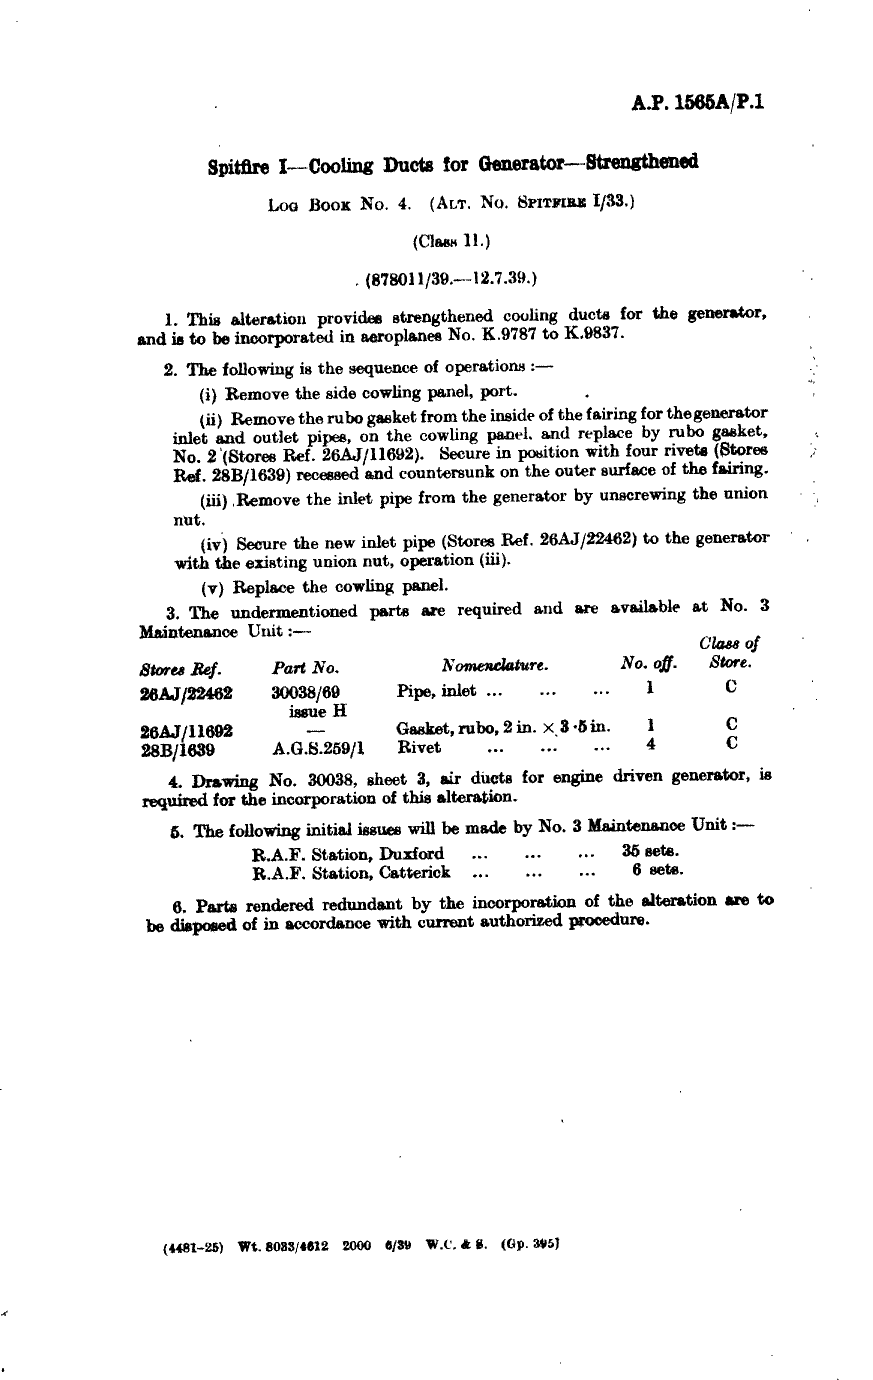 Sample page 1 from AirCorps Library document: Spitfire I Cooling Ducts for Generator Strengthened